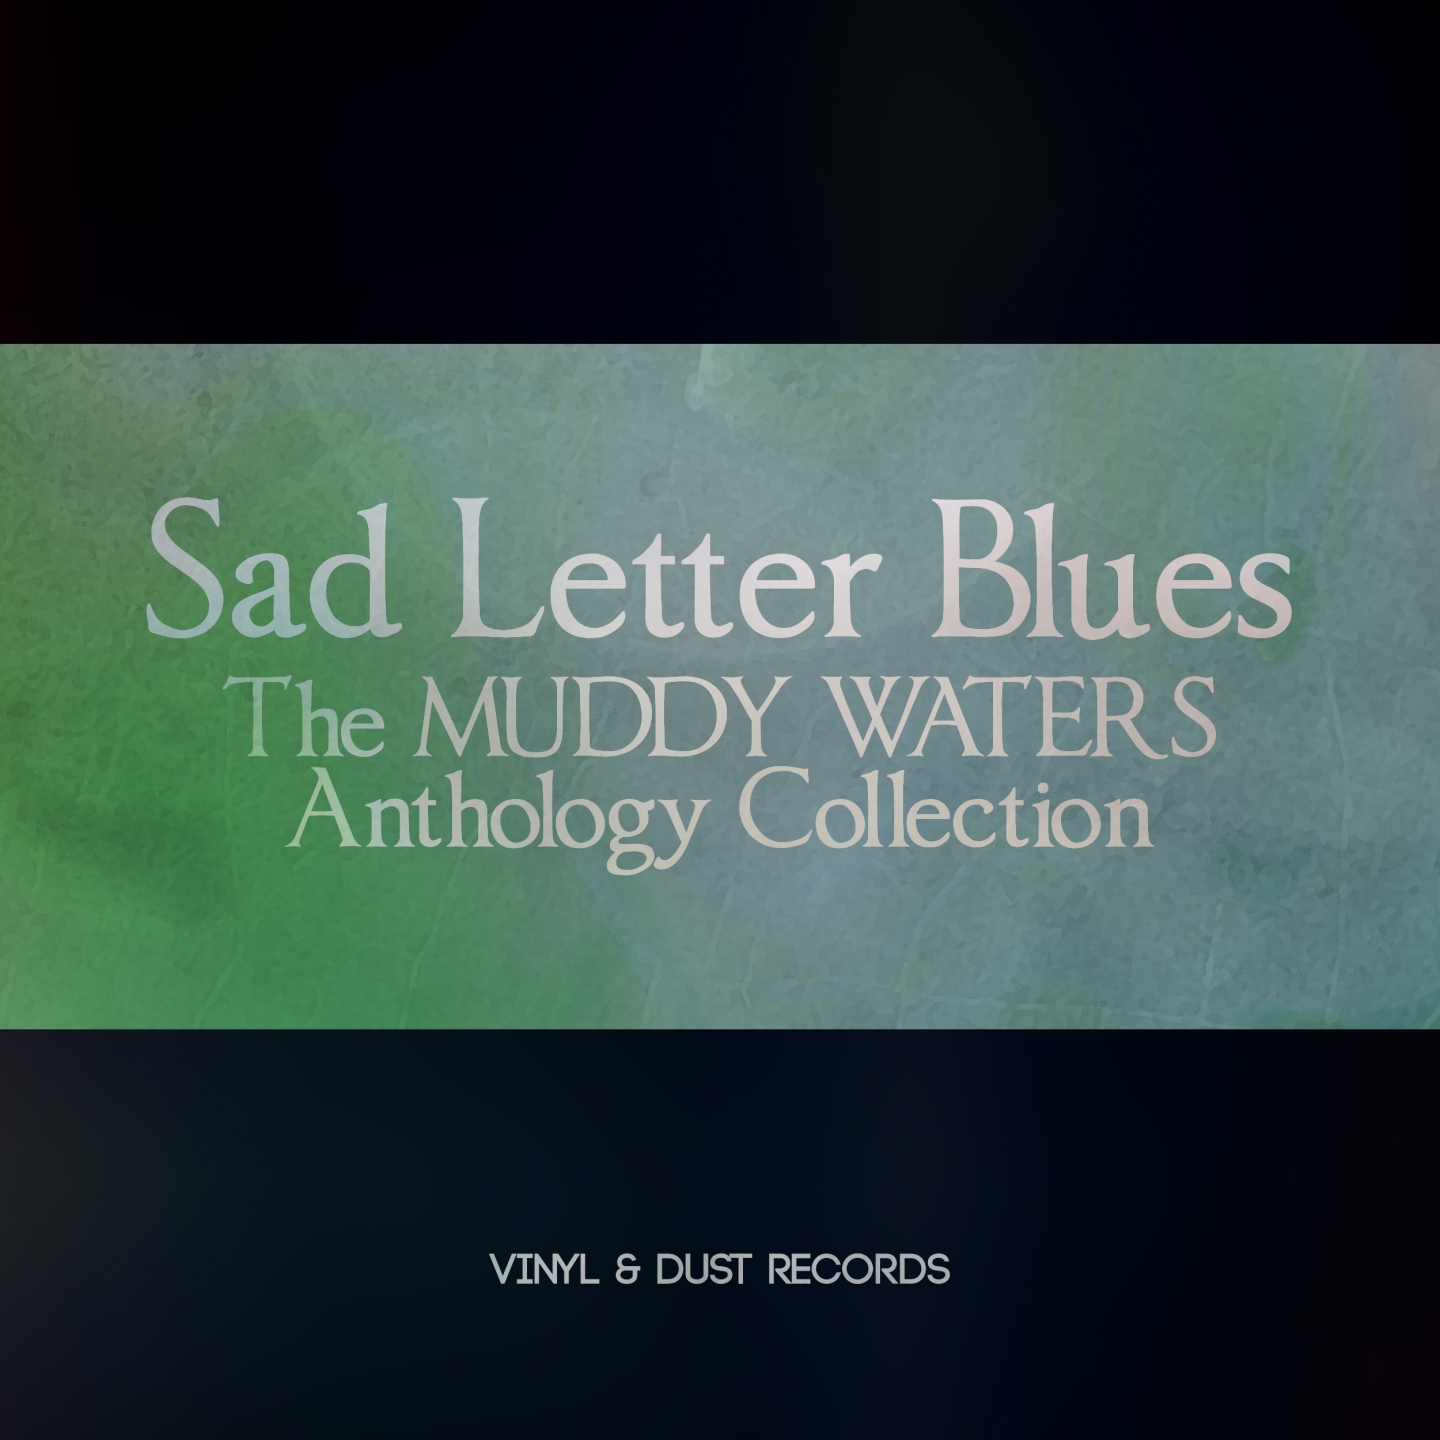 Sad Letter Blues (The Muddy Waters Anthology Collection)